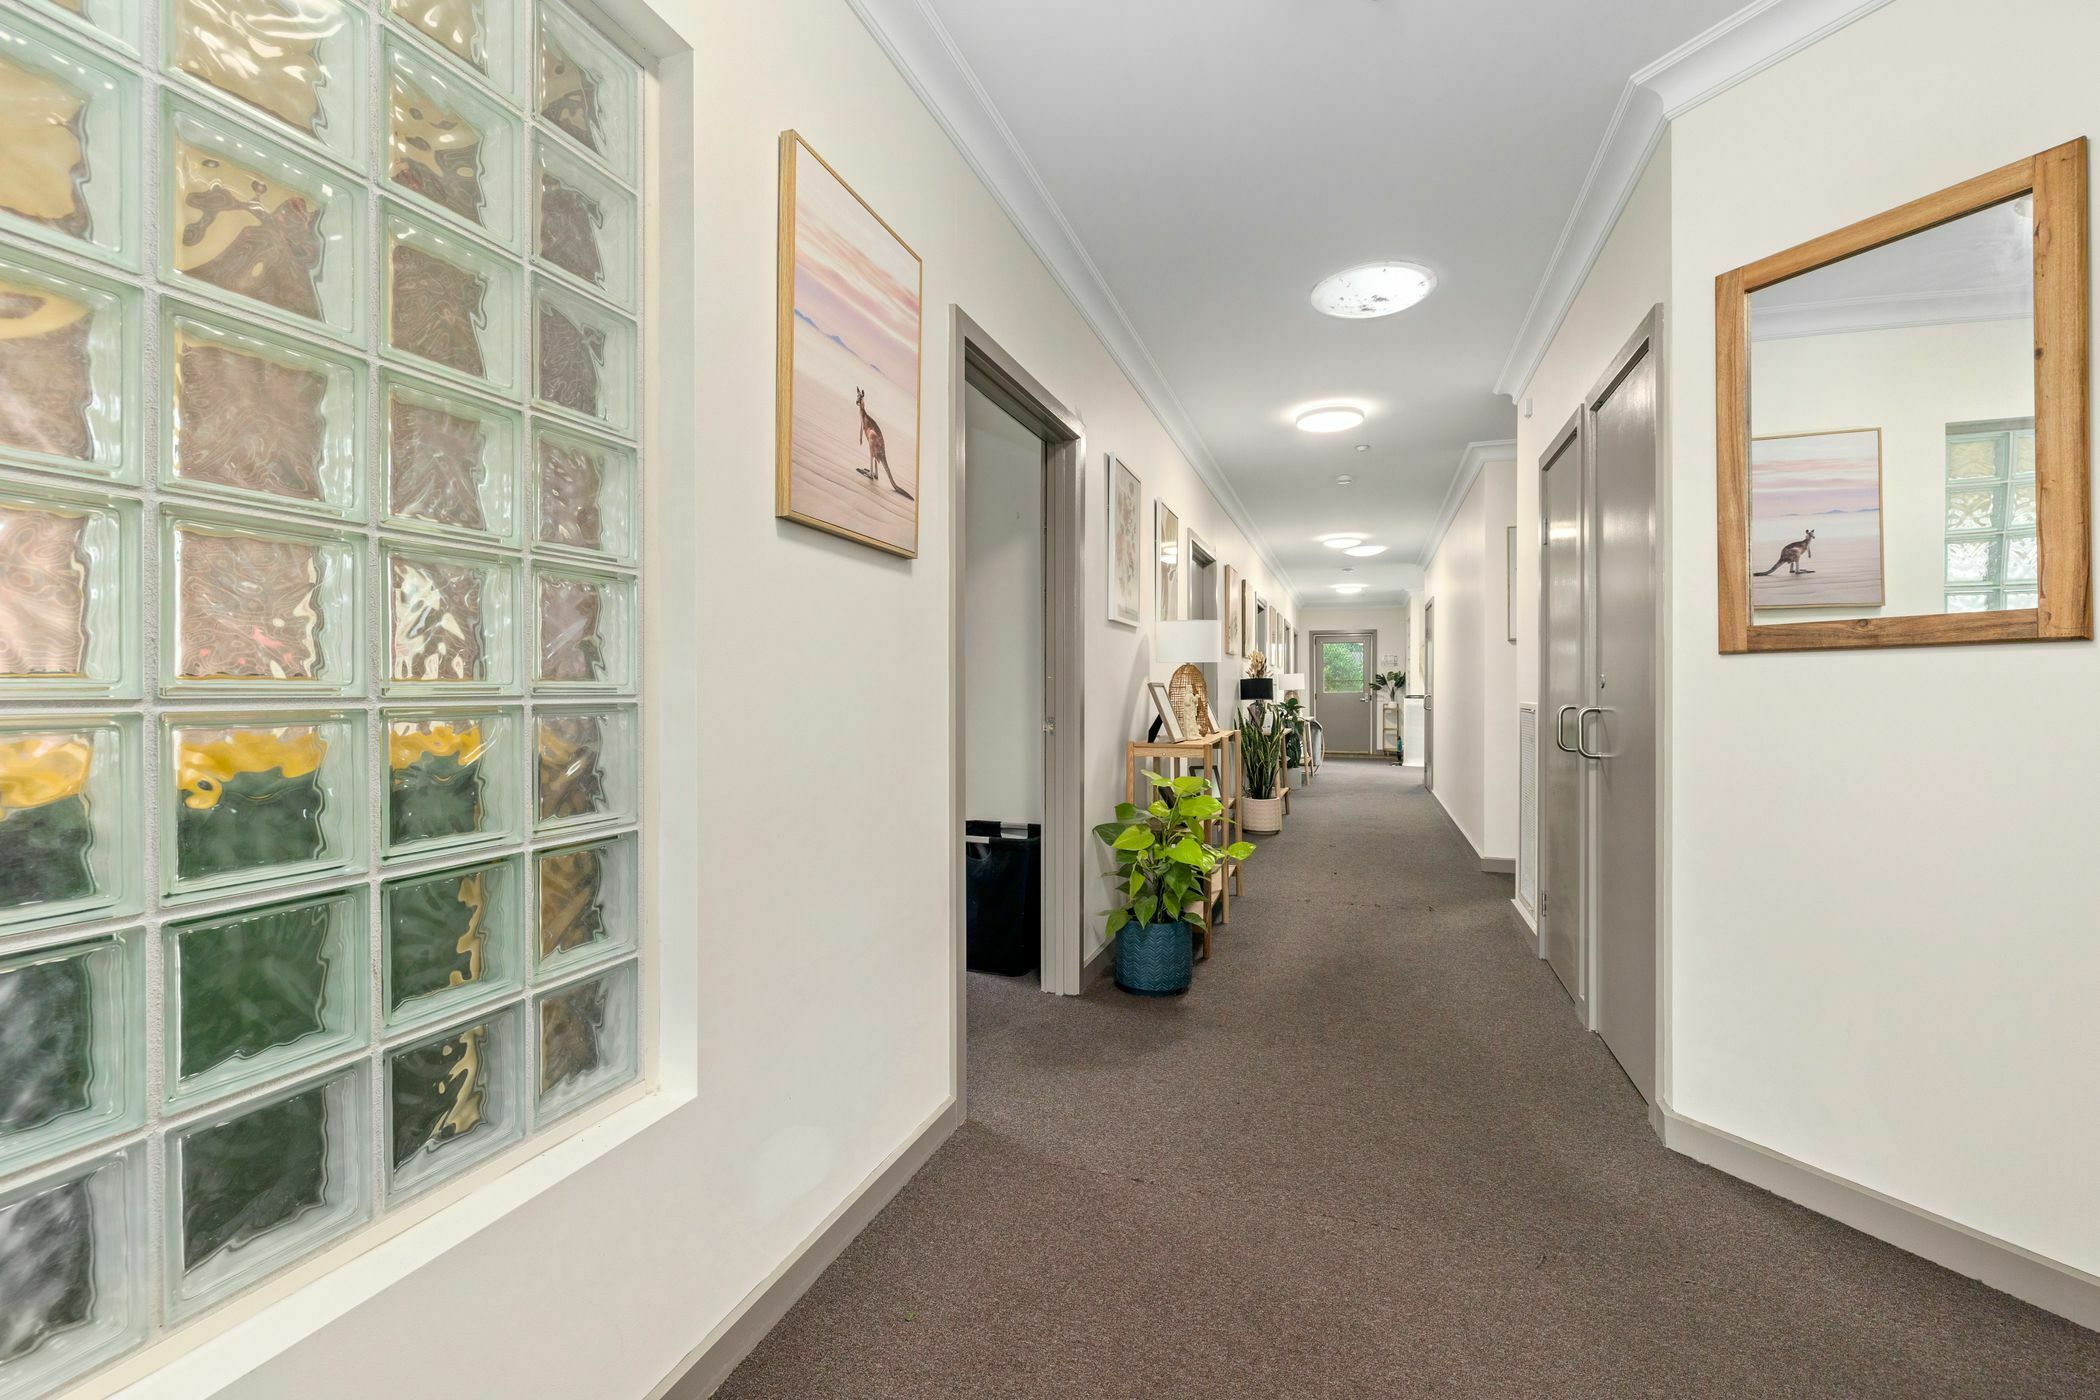 Hallway area with white wallpaper and wall art